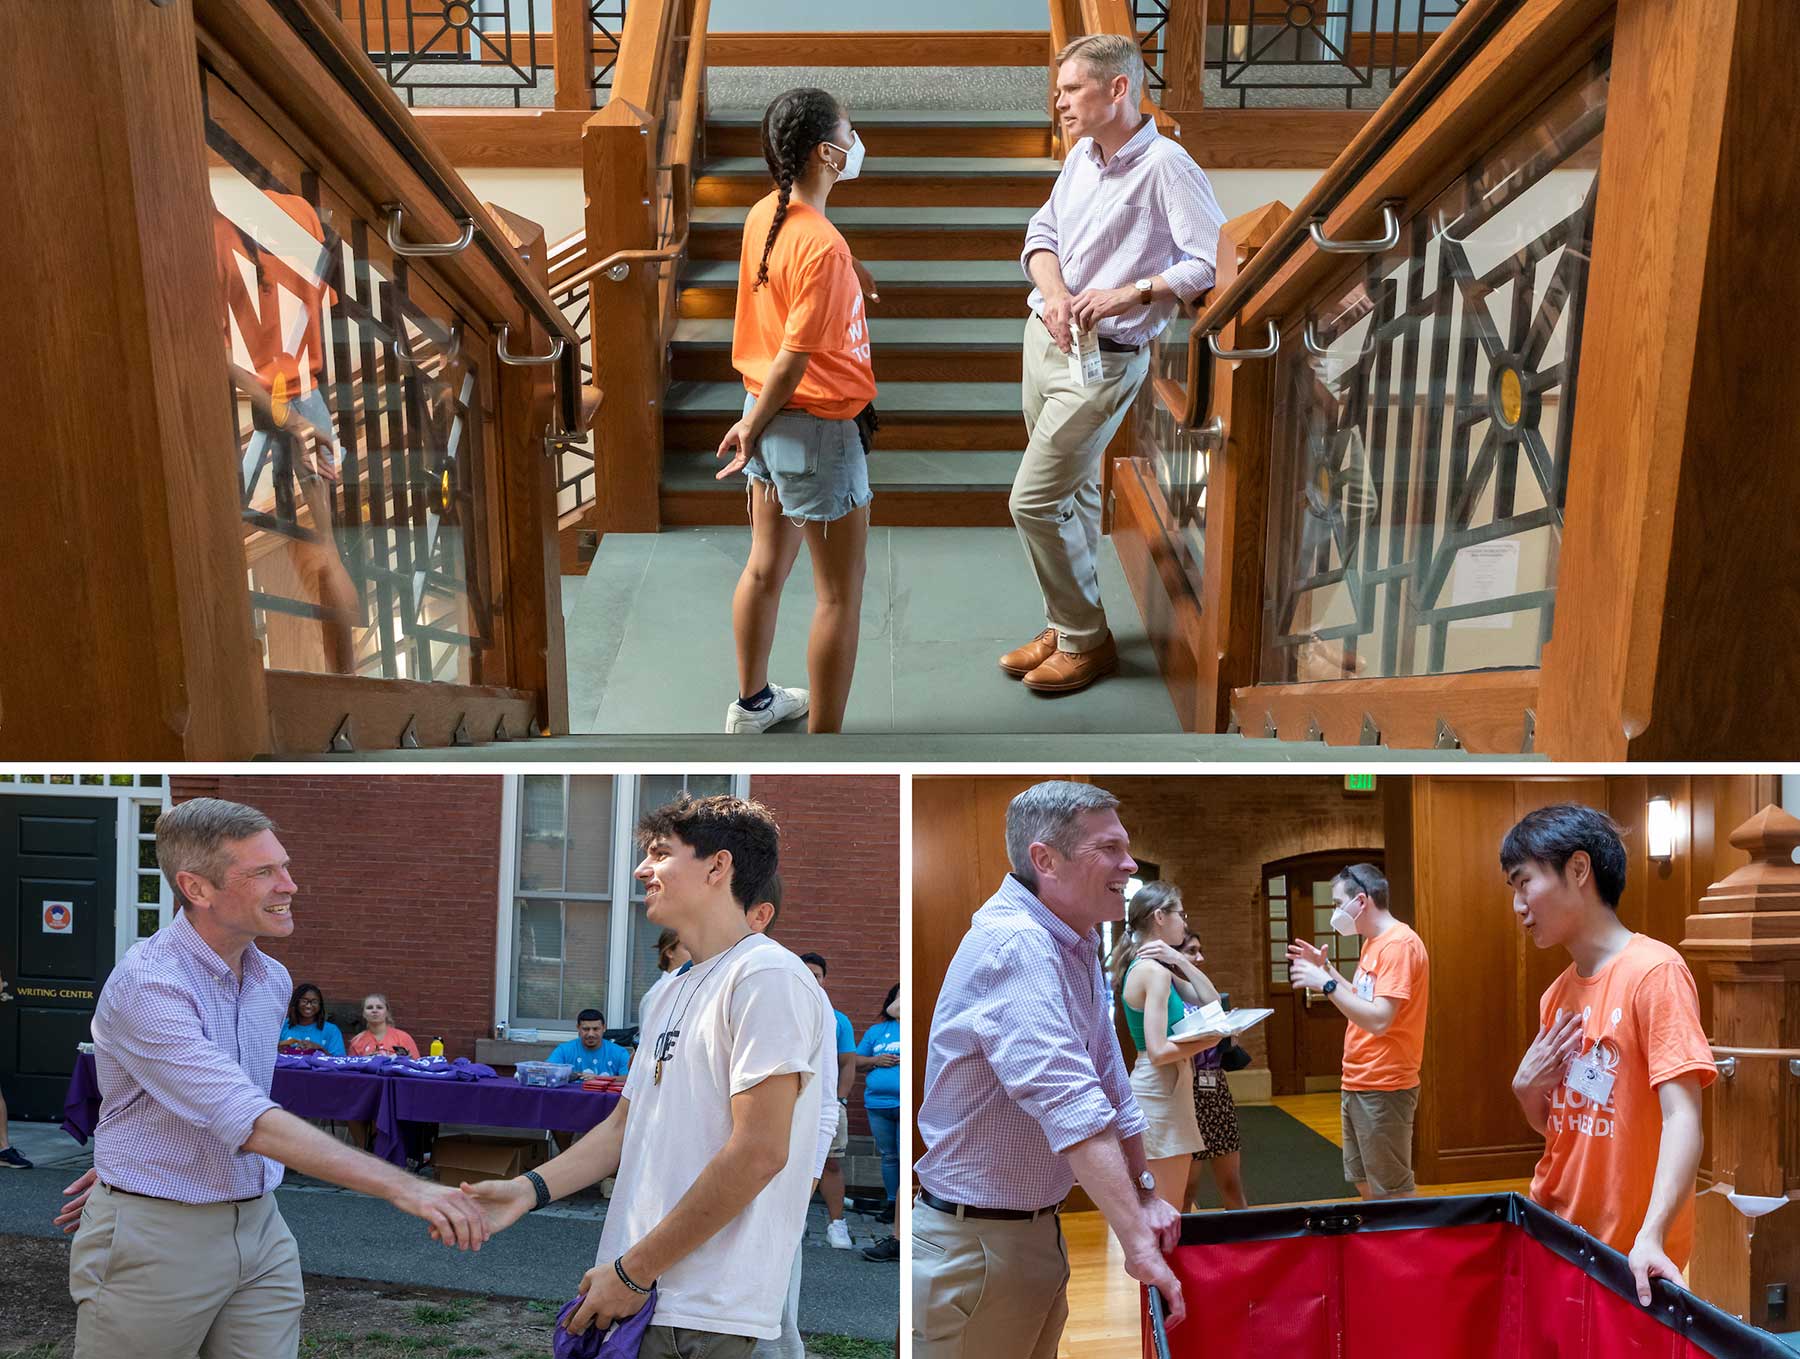 President Elliott greets new students as they enter a residence hall.